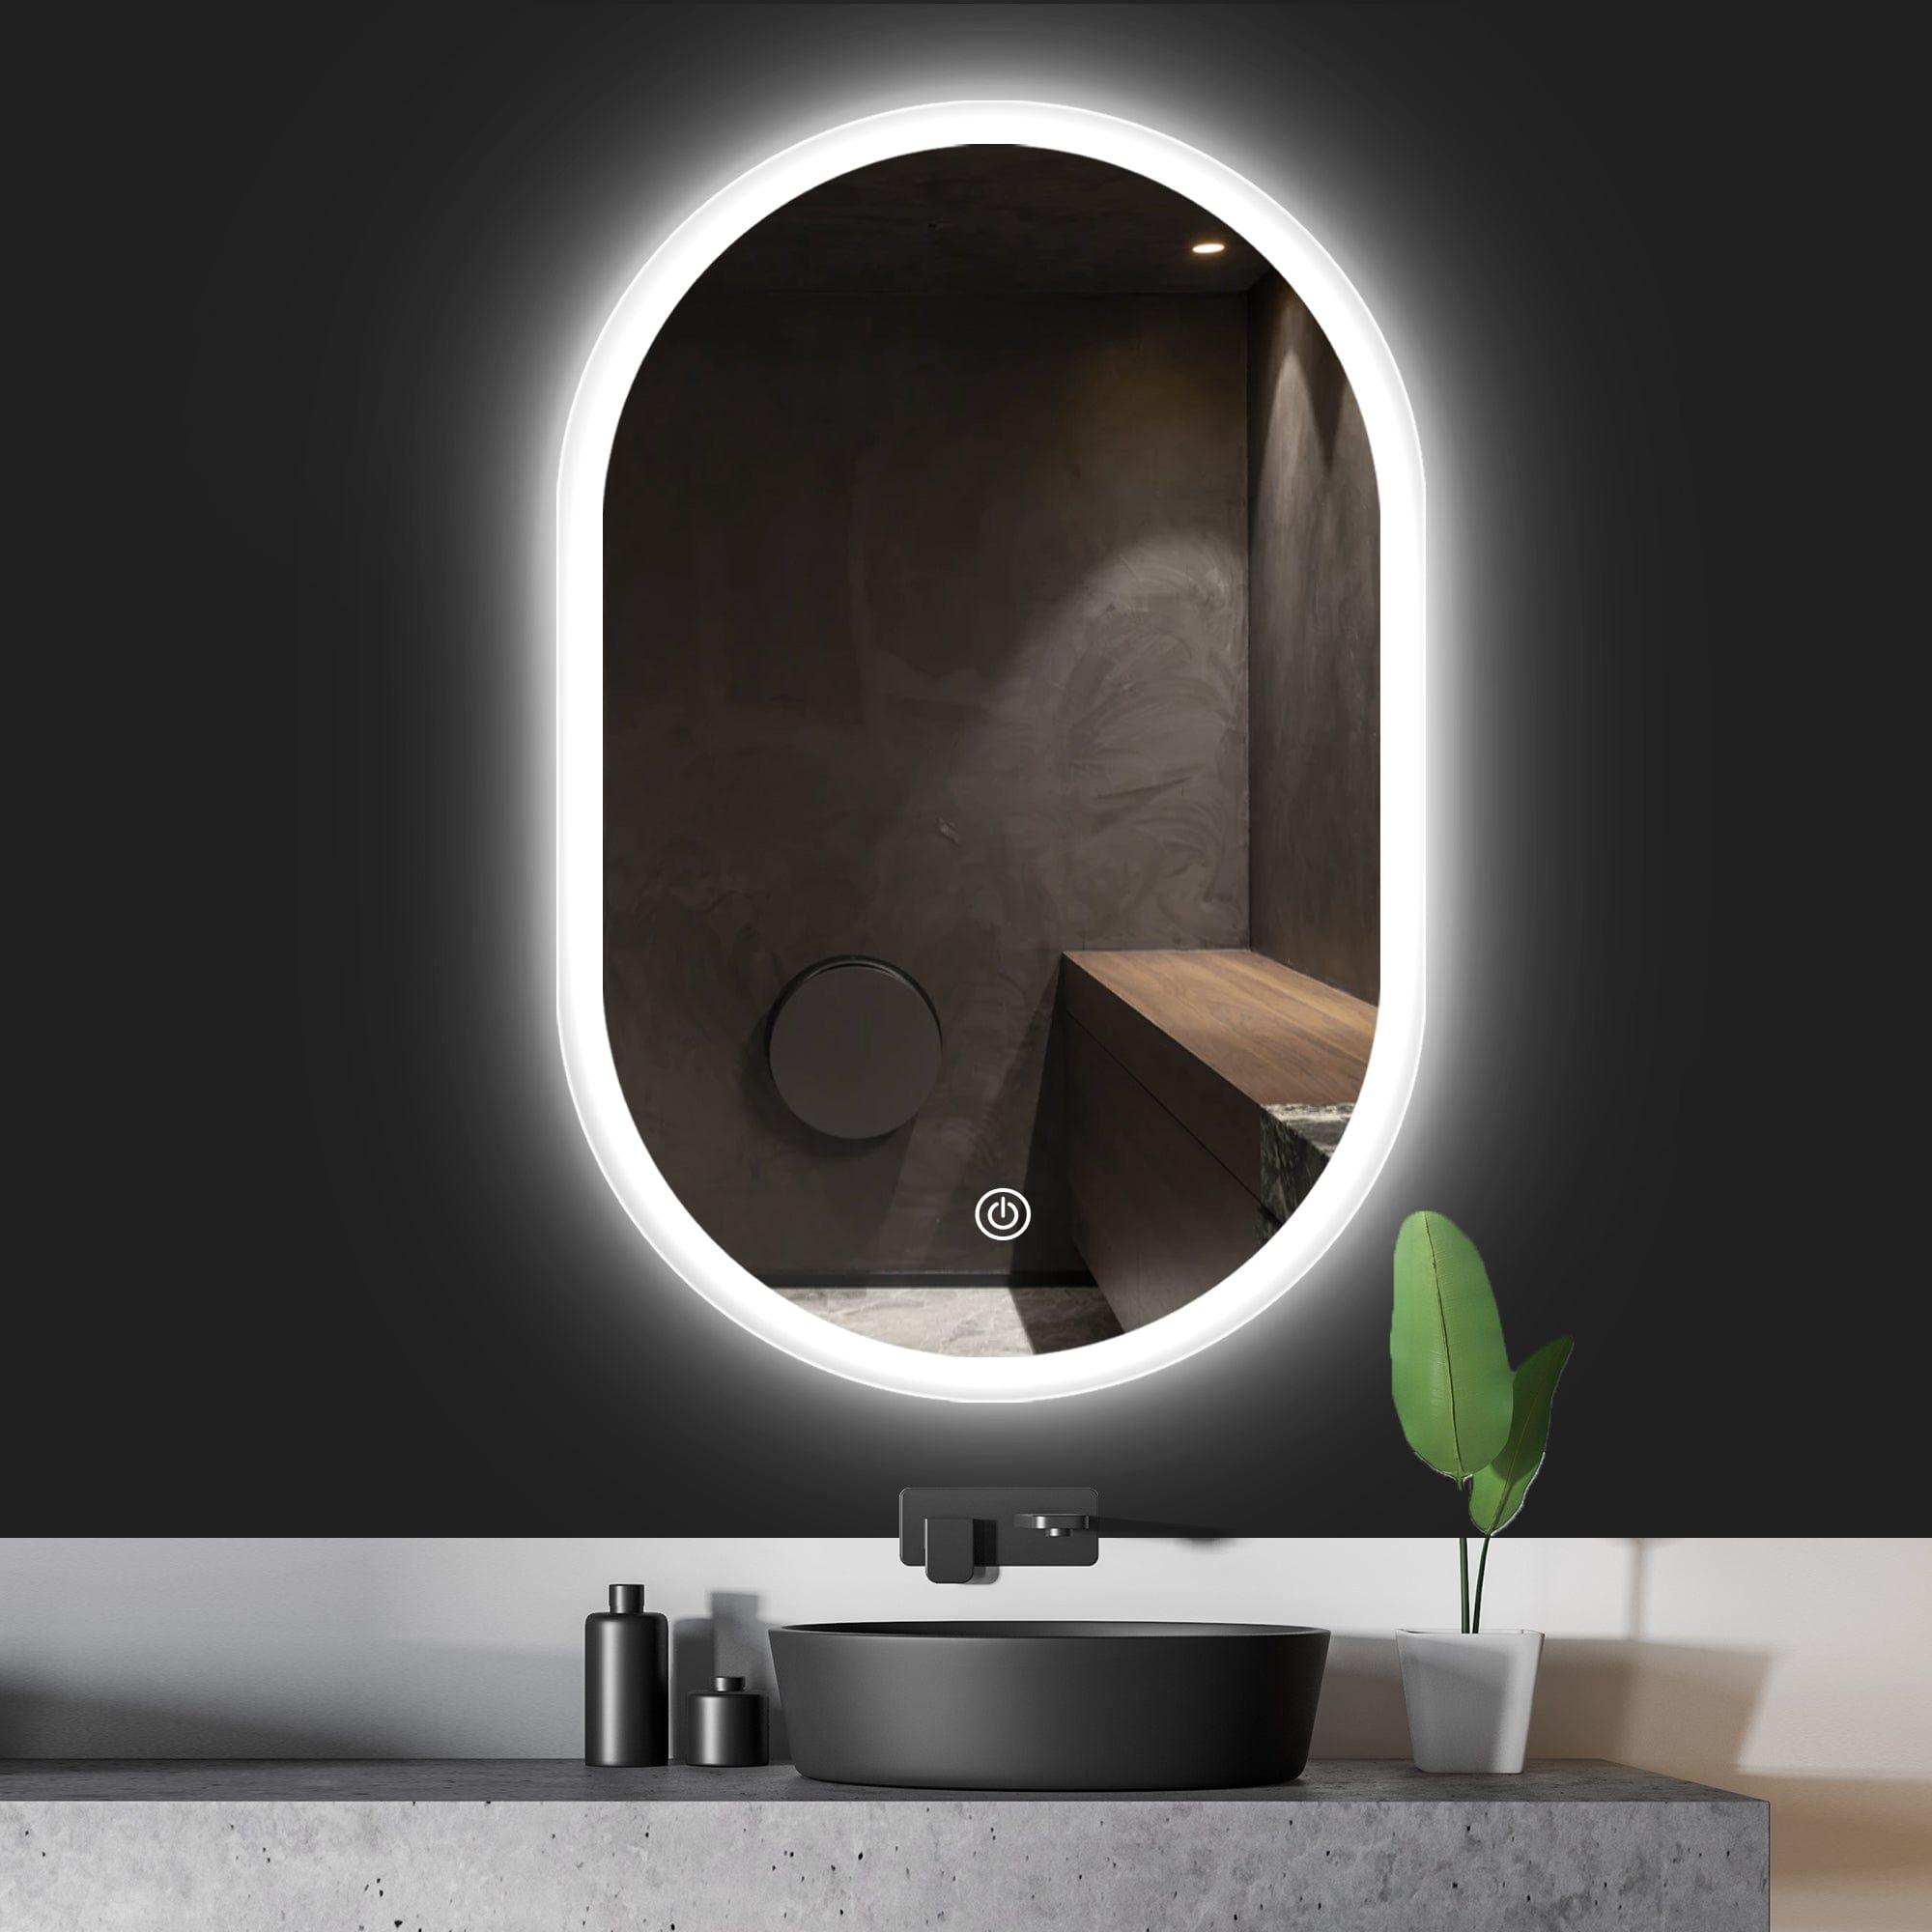 Shop Claremont Oval LED Mirror Mademoiselle Home Decor